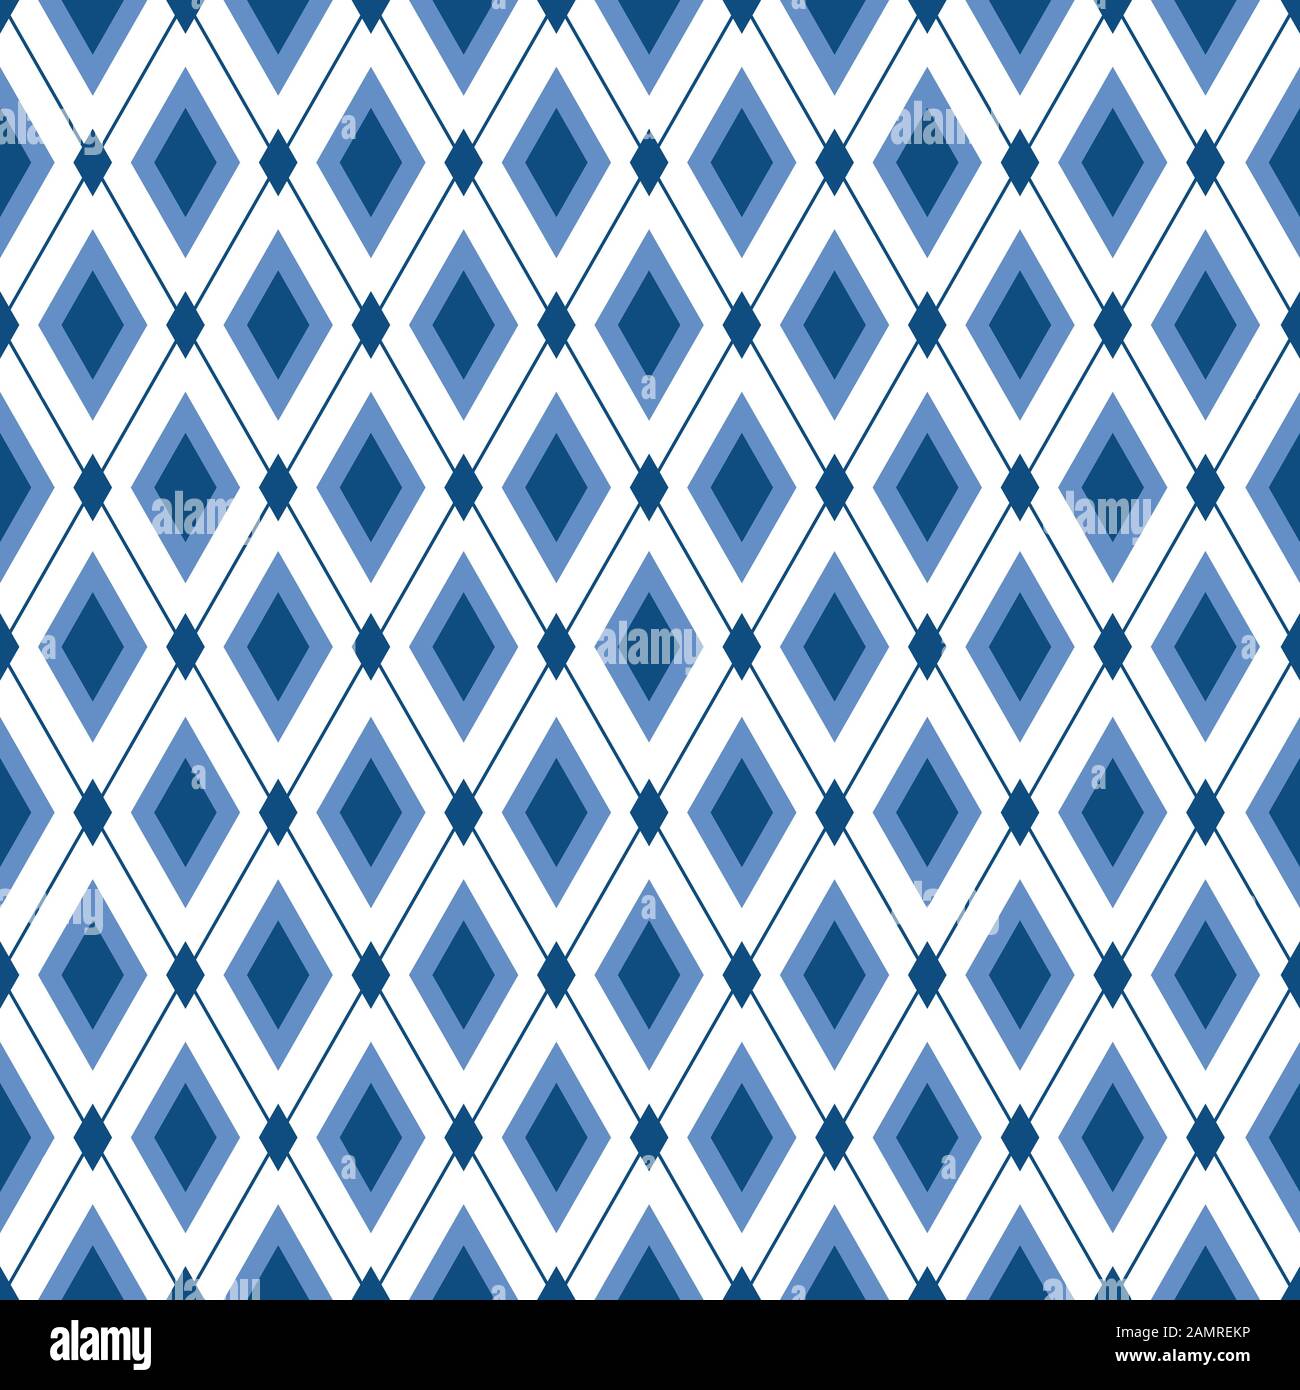 Blue Abstract Geometric Diamond Seamless Pattern Background Wallpaper  Banner Label Vector Design Stock Illustration  Download Image Now  iStock